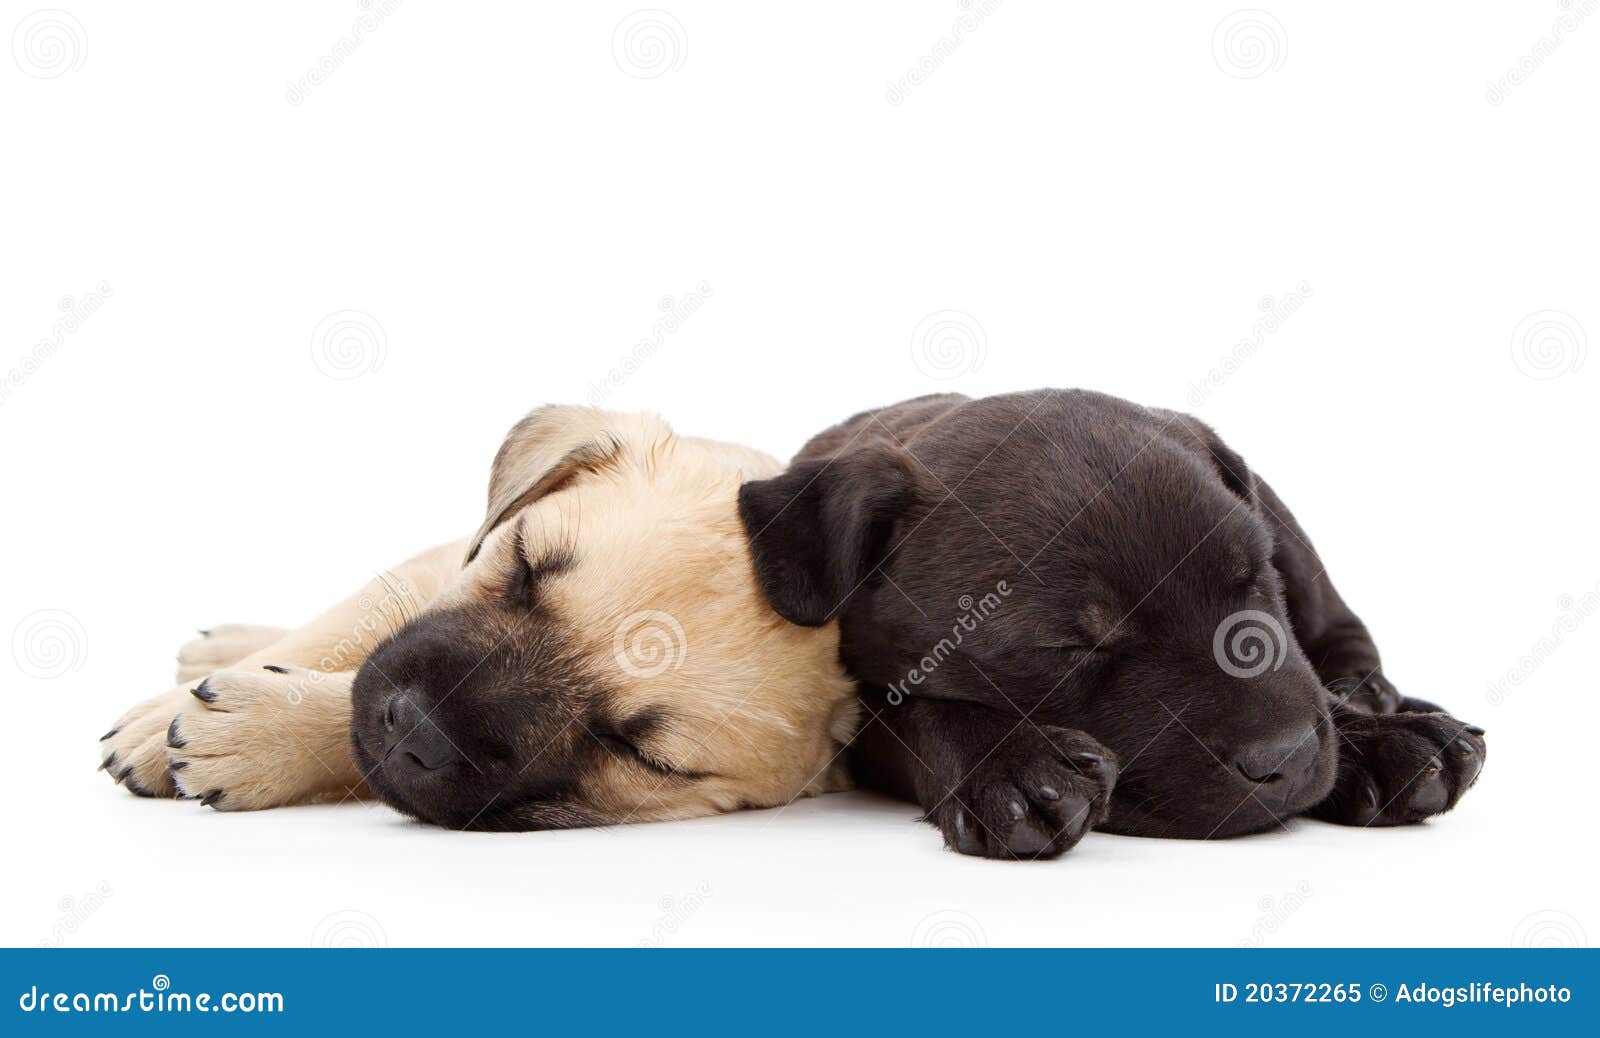 two sleeping puppies laying together